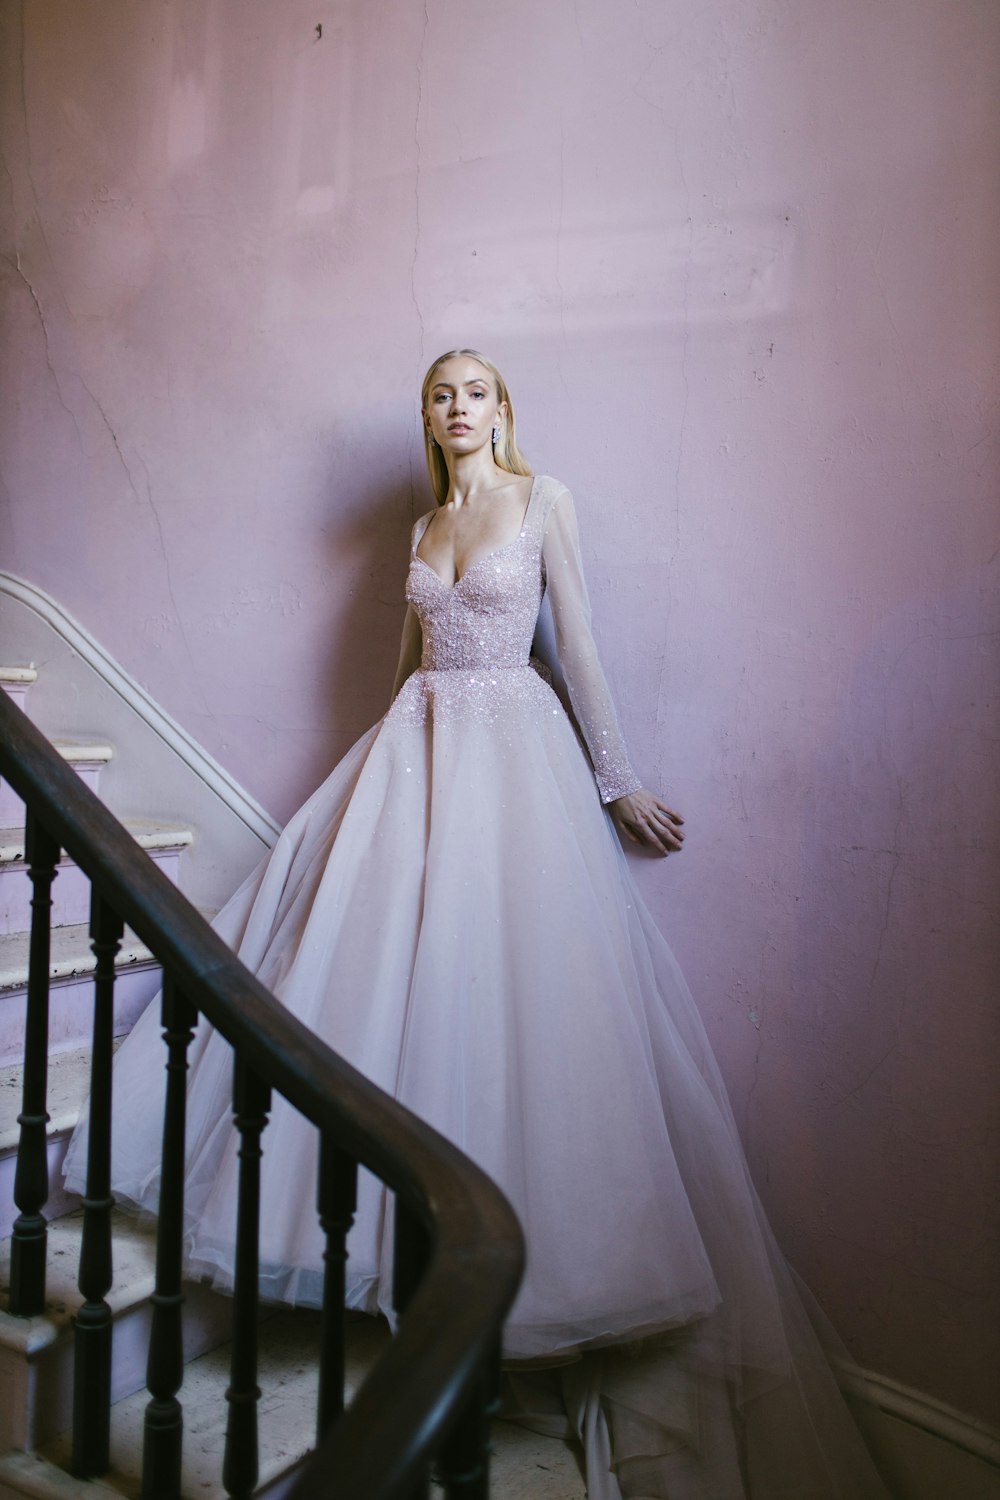 woman in white wedding dress standing on staircase